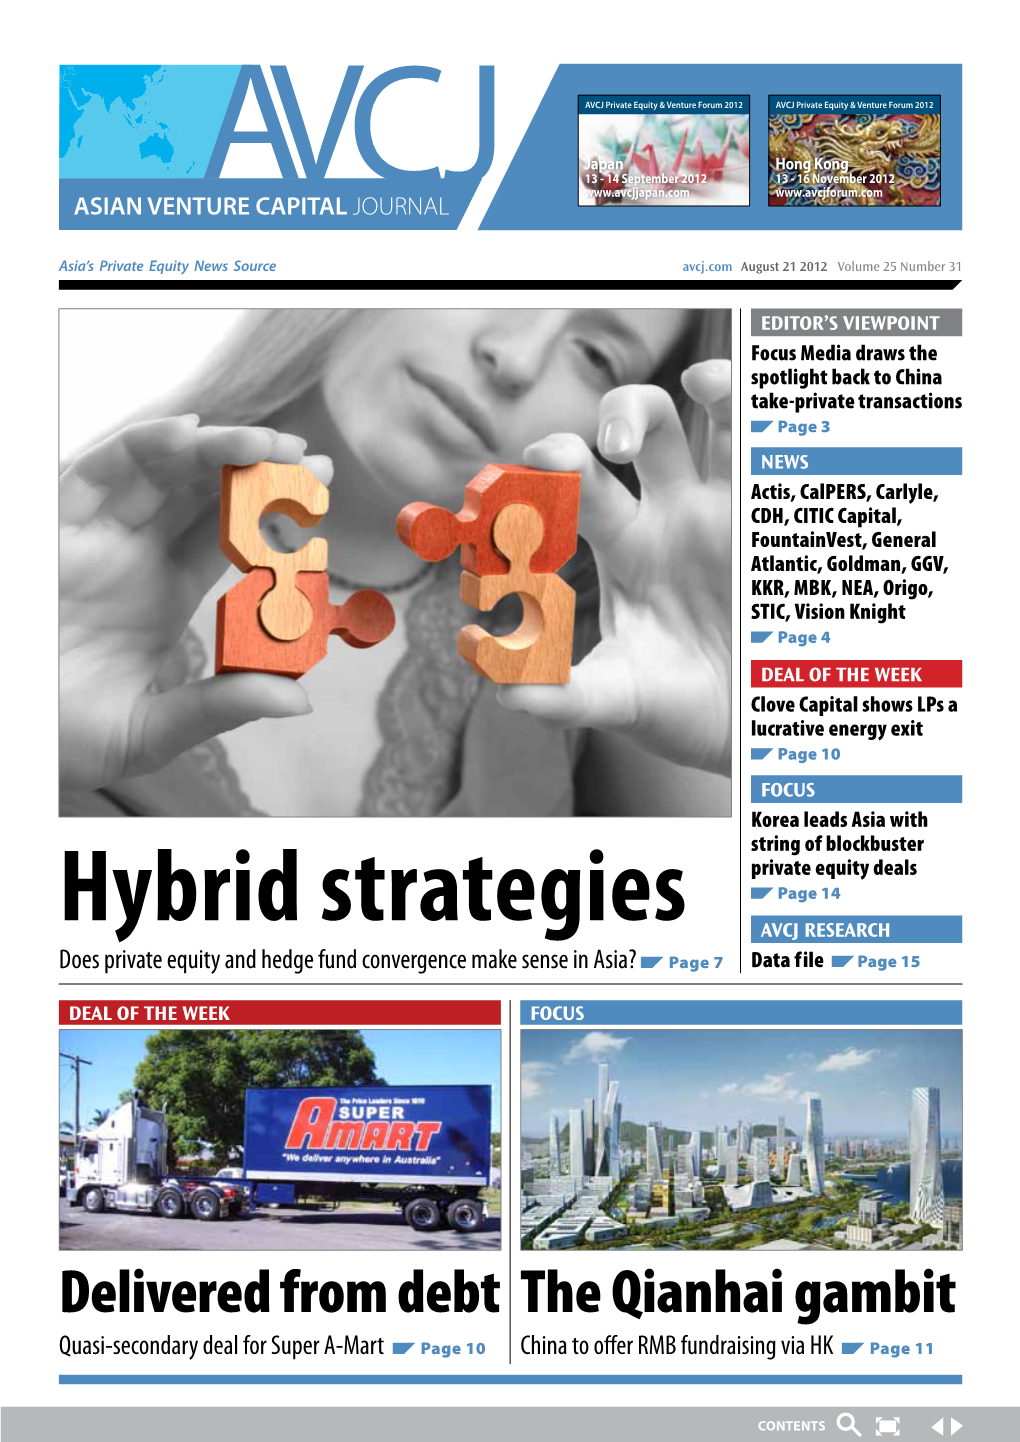 Hybrid Strategies AVCJ Research Does Private Equity and Hedge Fund Convergence Make Sense in Asia? Page 7 Data F Ile Page 15